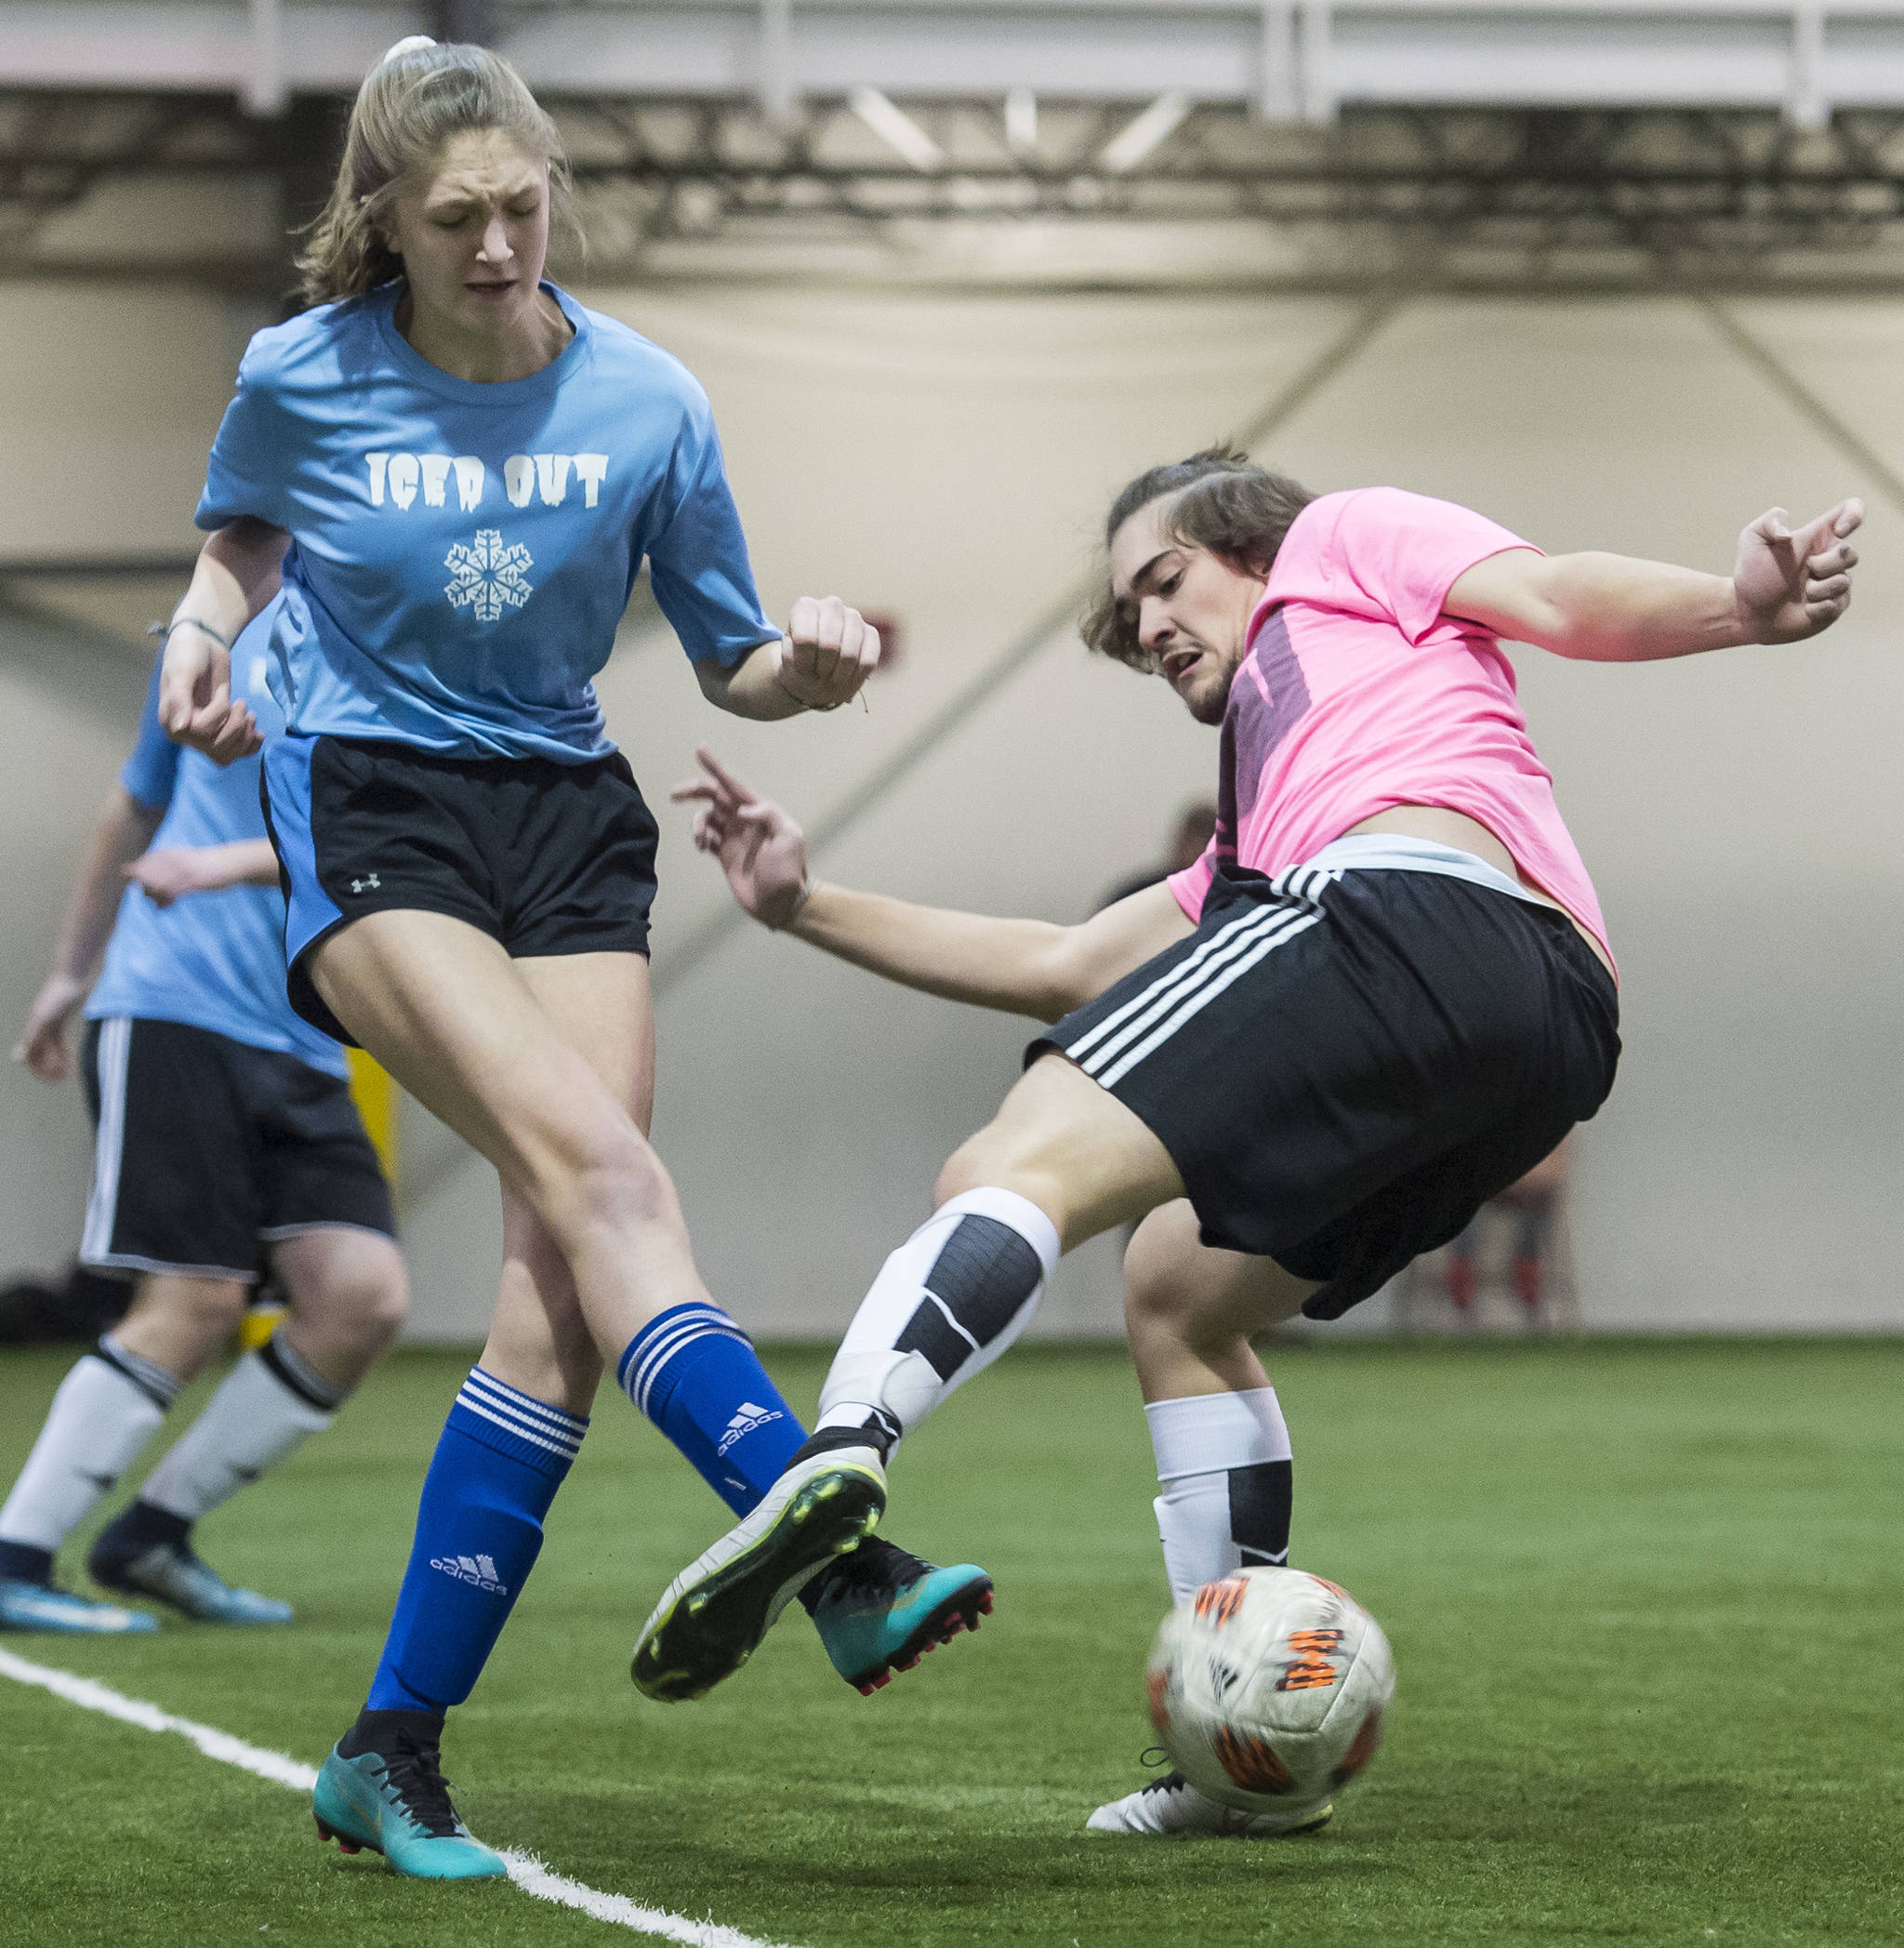 Iced Out’s Brooke Sanford kicks the ball away from Pit Vipers’ Asher Aanrud at the annual Holiday Cup Soccer Tournament at the Wells Fargo Dimond Park Field House on Wednesday, Dec. 26, 2018. (Michael Penn | Juneau Empire)